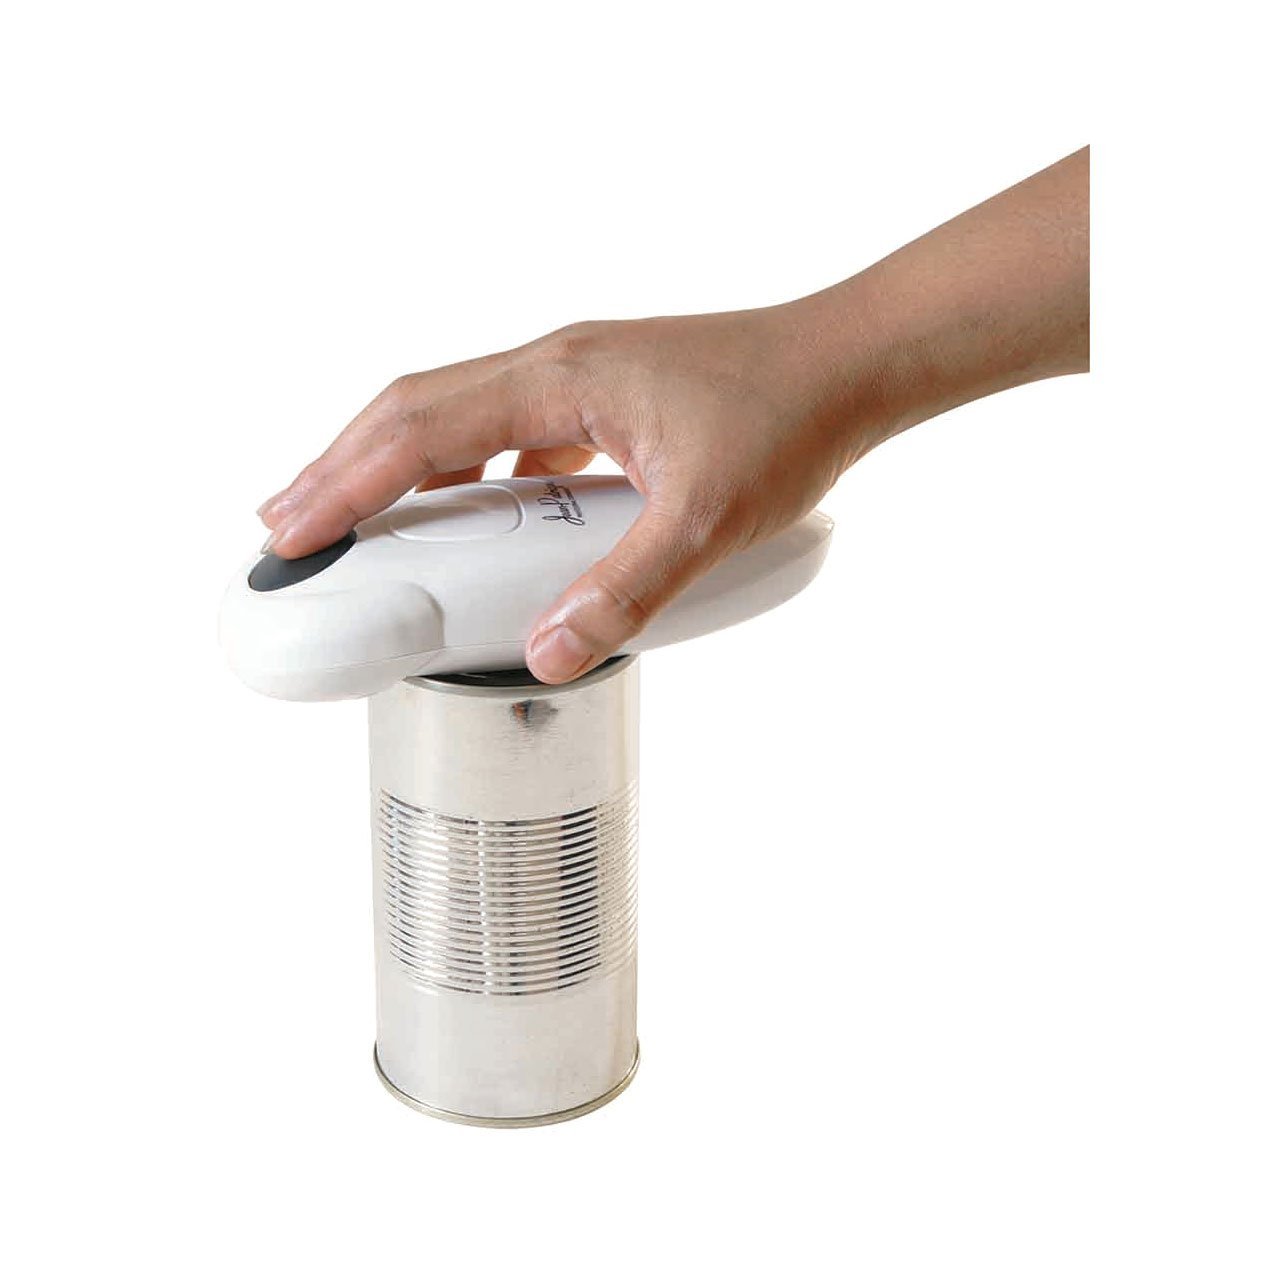 Auto-One Touch Can Opener